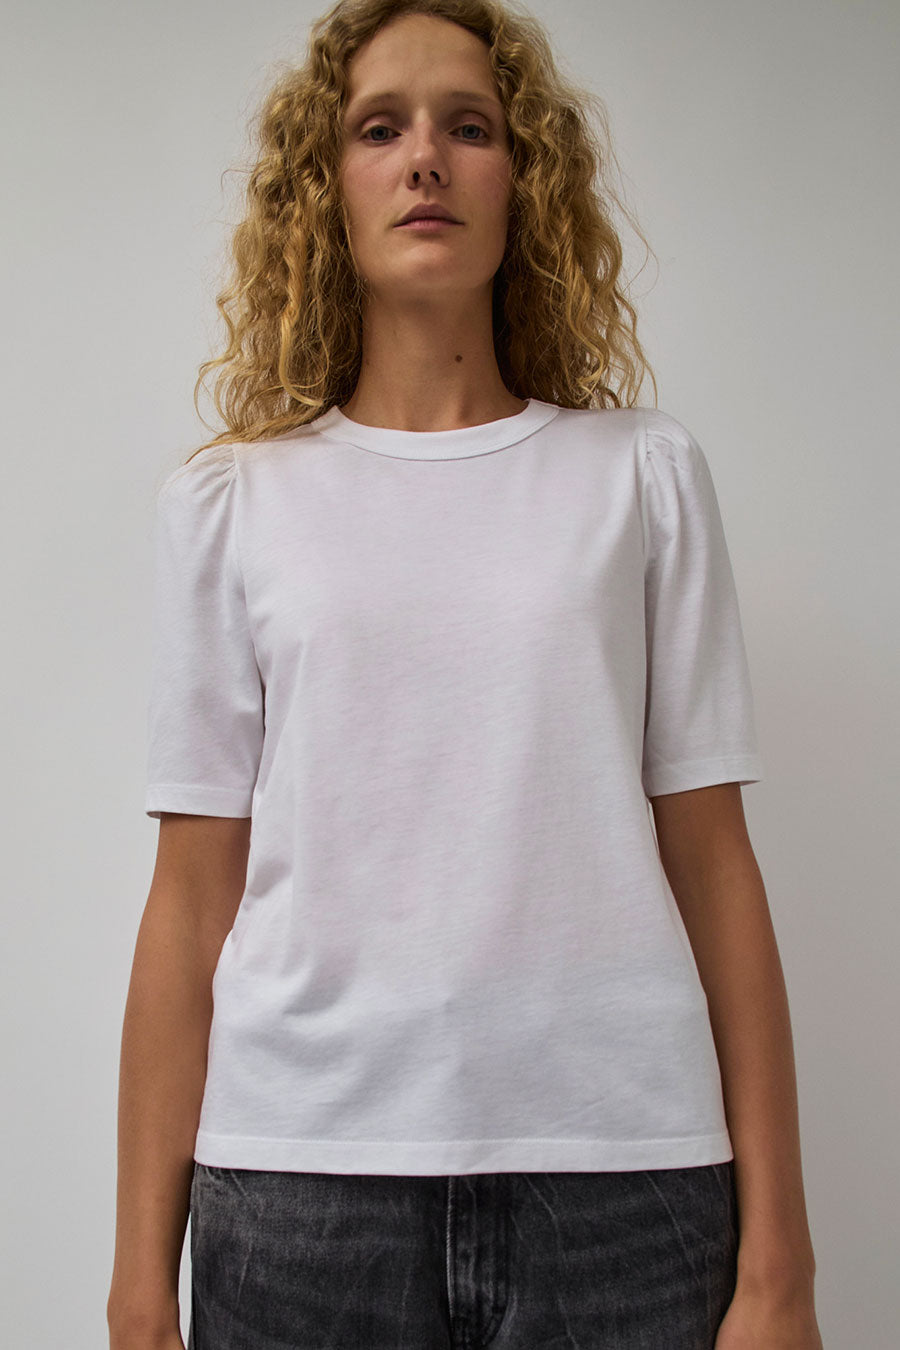 Rodebjer Dory T-Shirt in White